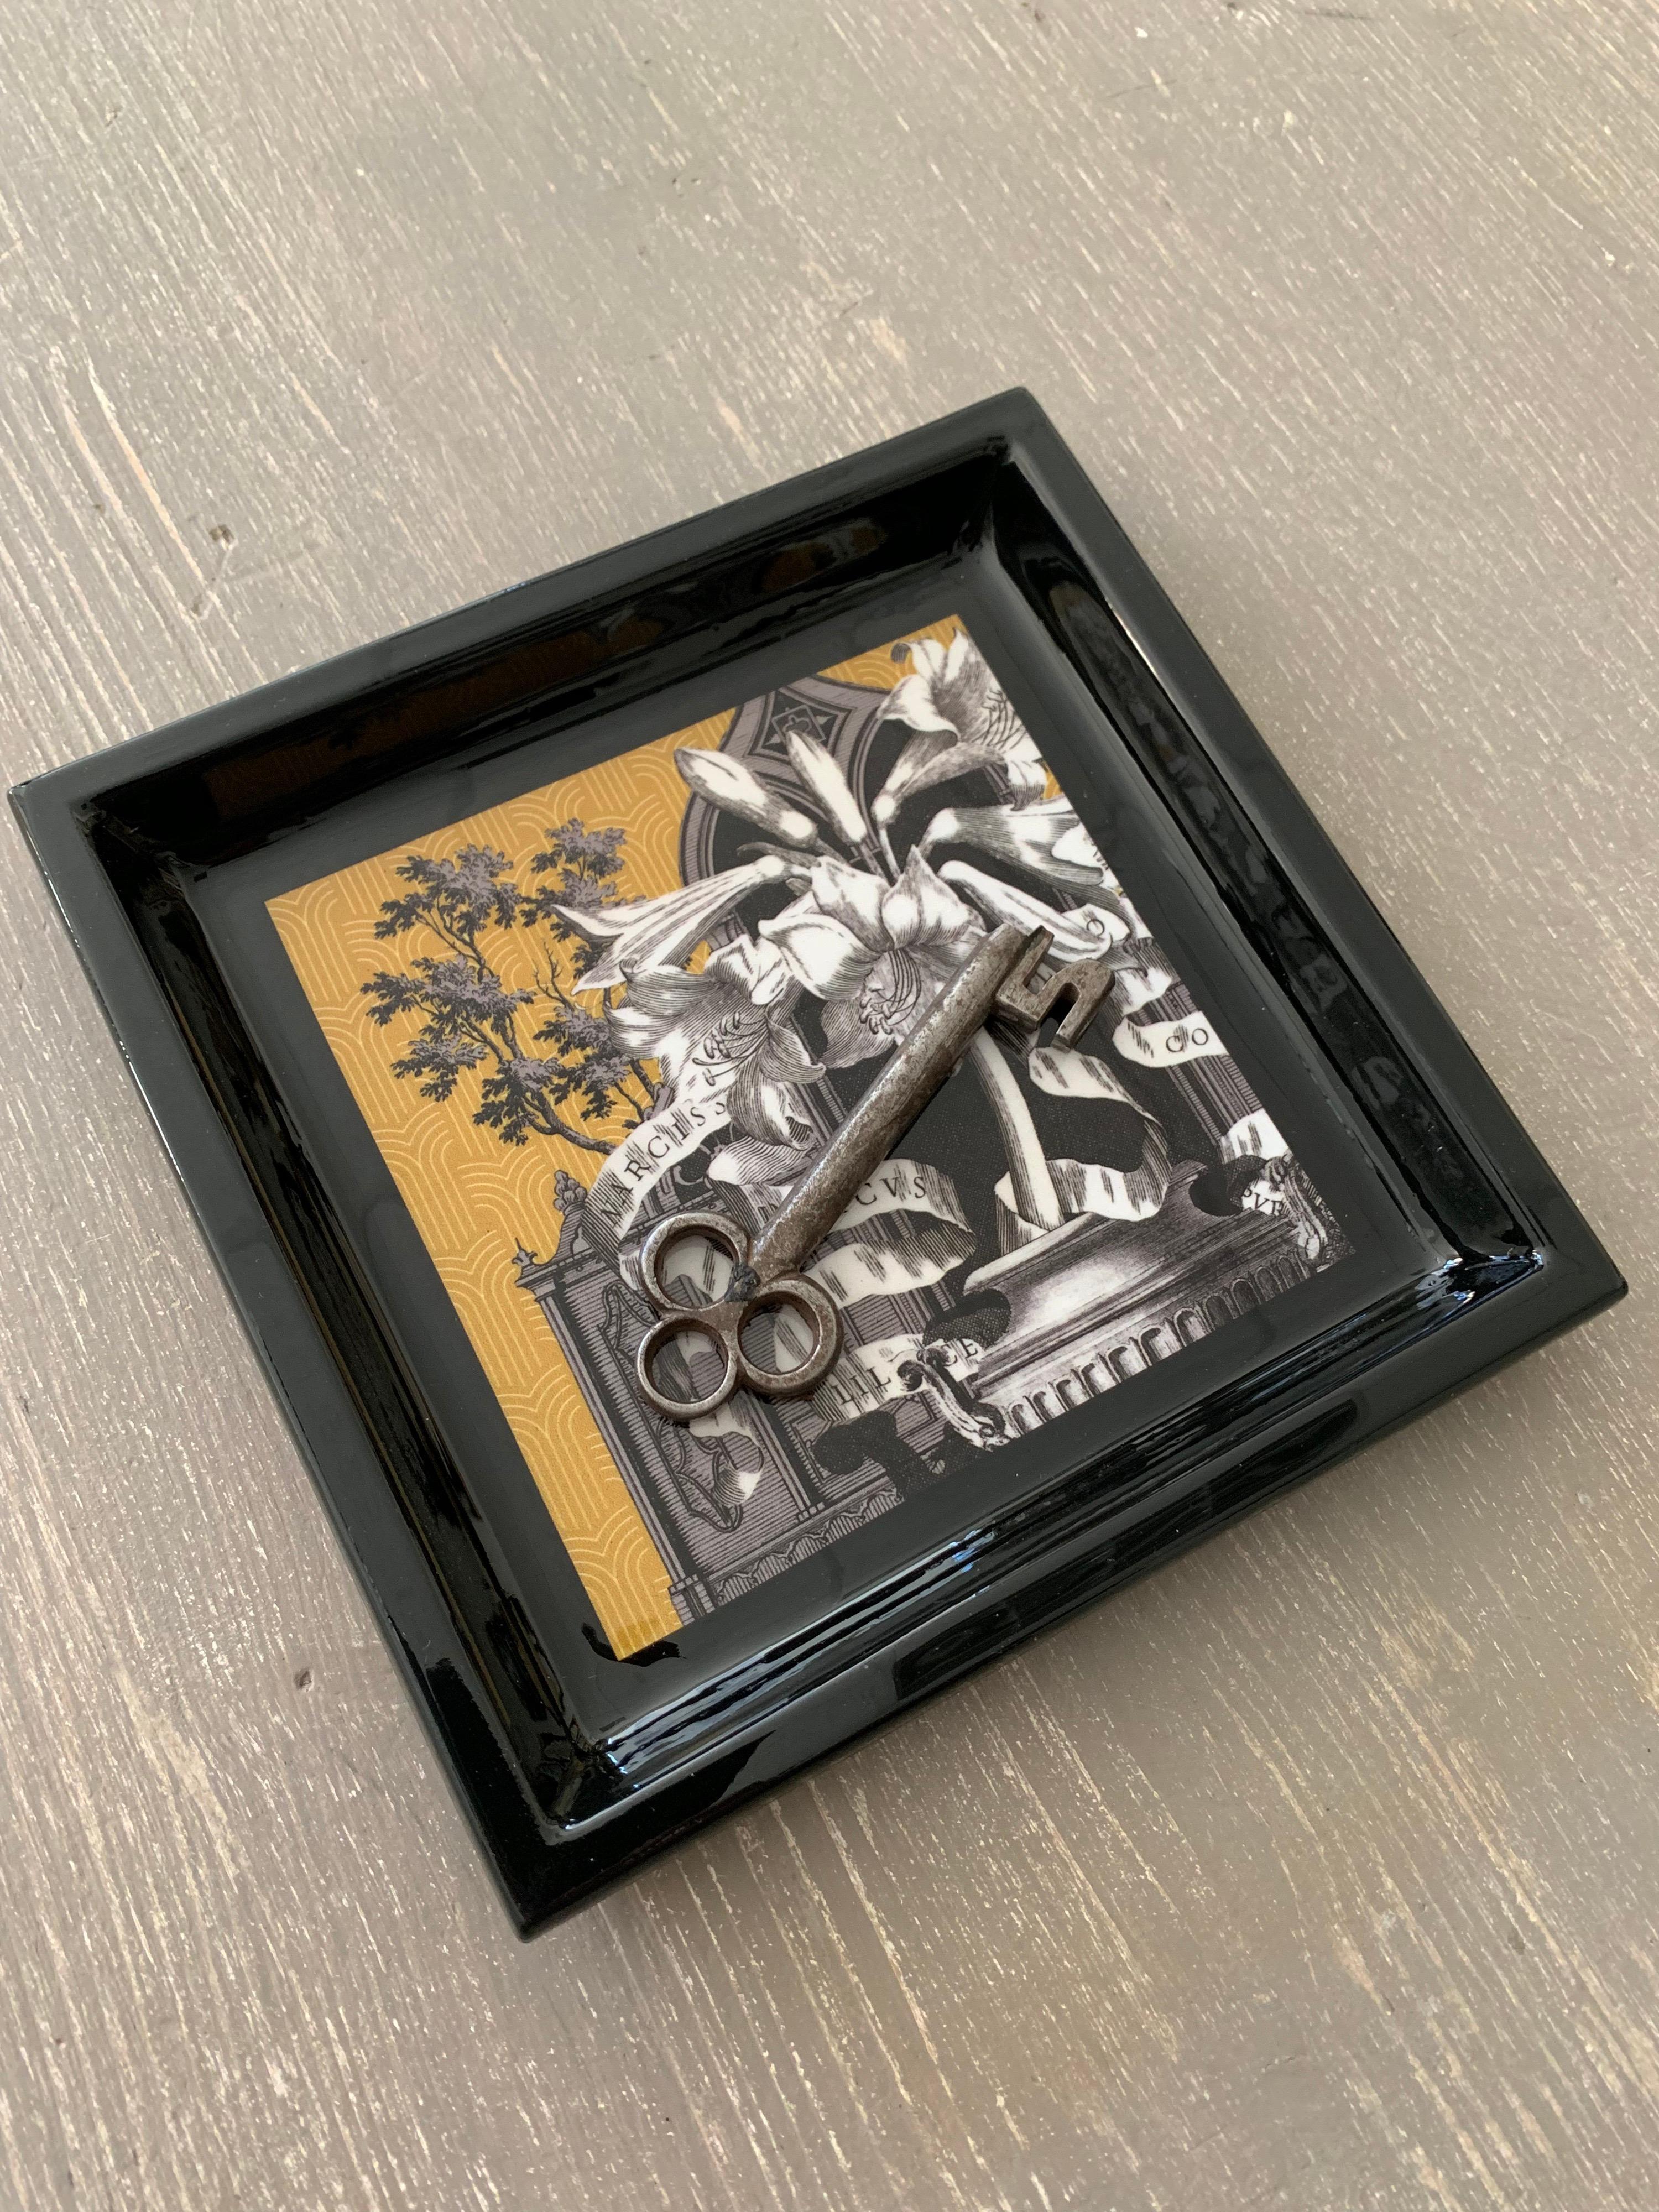 Elegant printed pocket tray portraying a classical black and white decoration with flower in an ancient vase, on a mustard yellow background.

Completely produced in Florence, Italy by Artecornici design. All articles all exclusively conceived and